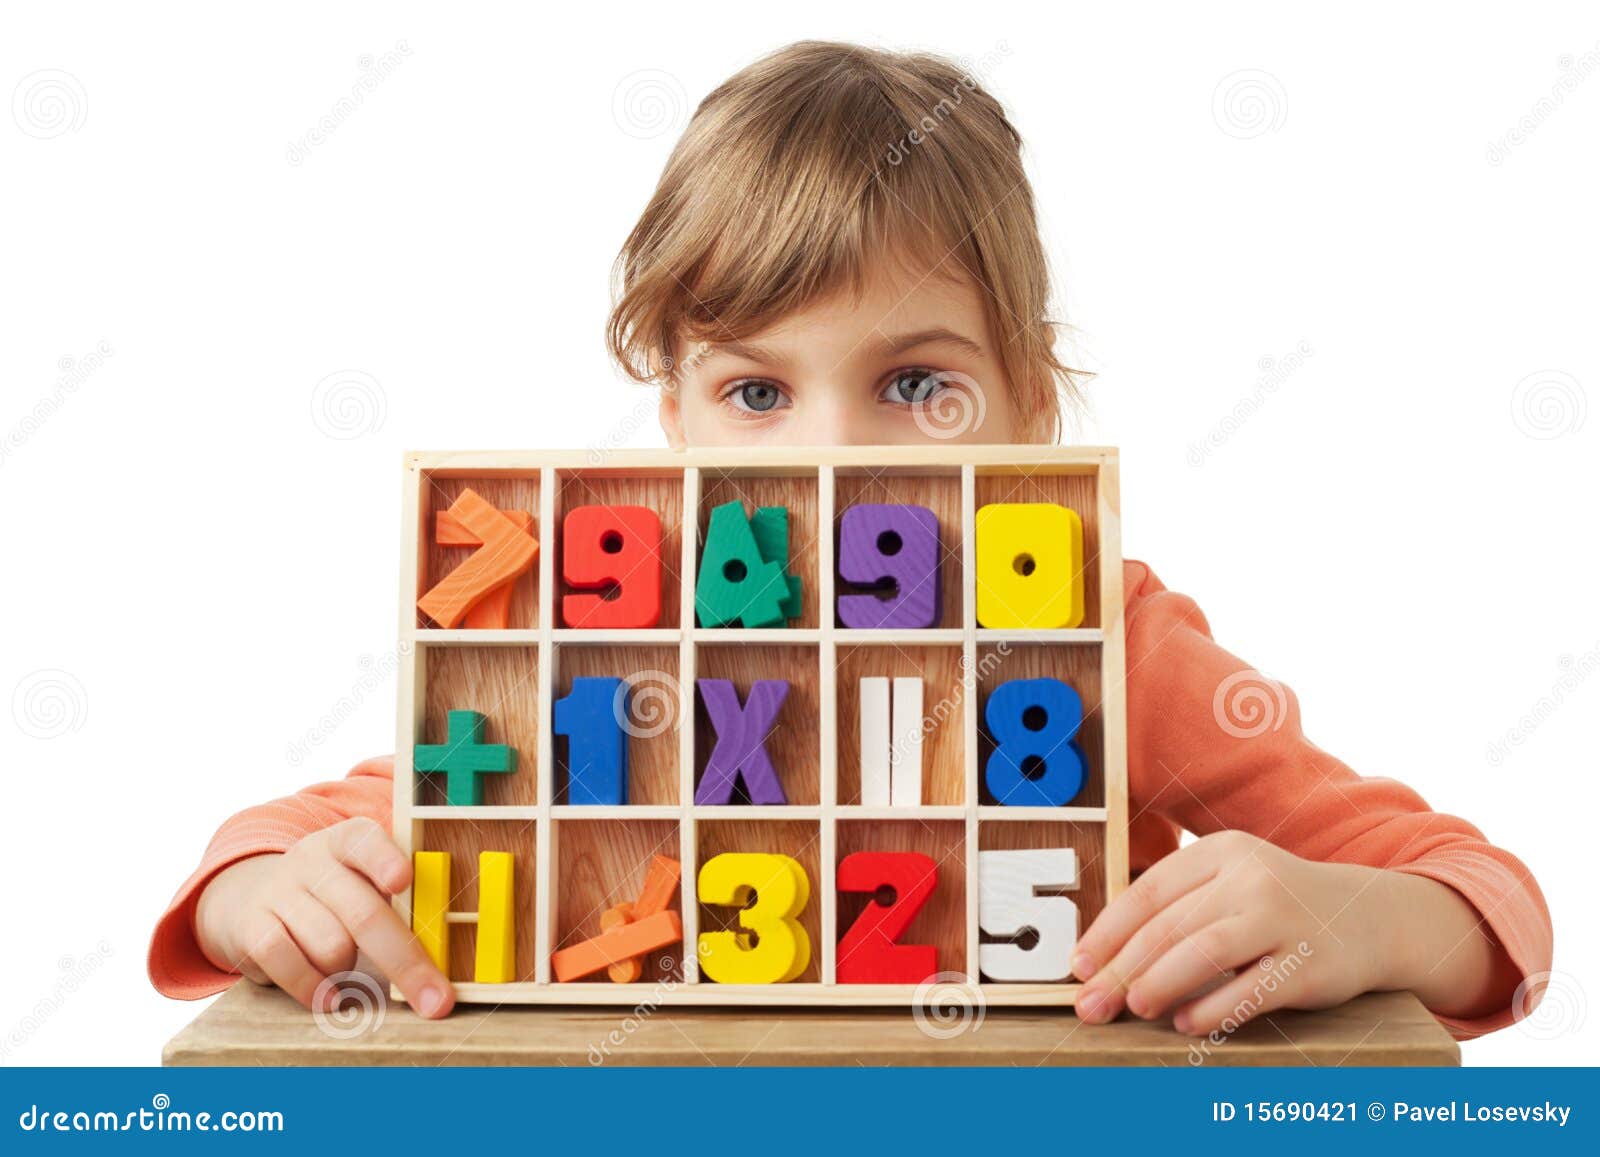 girl plays in wooden figures in form of numerals